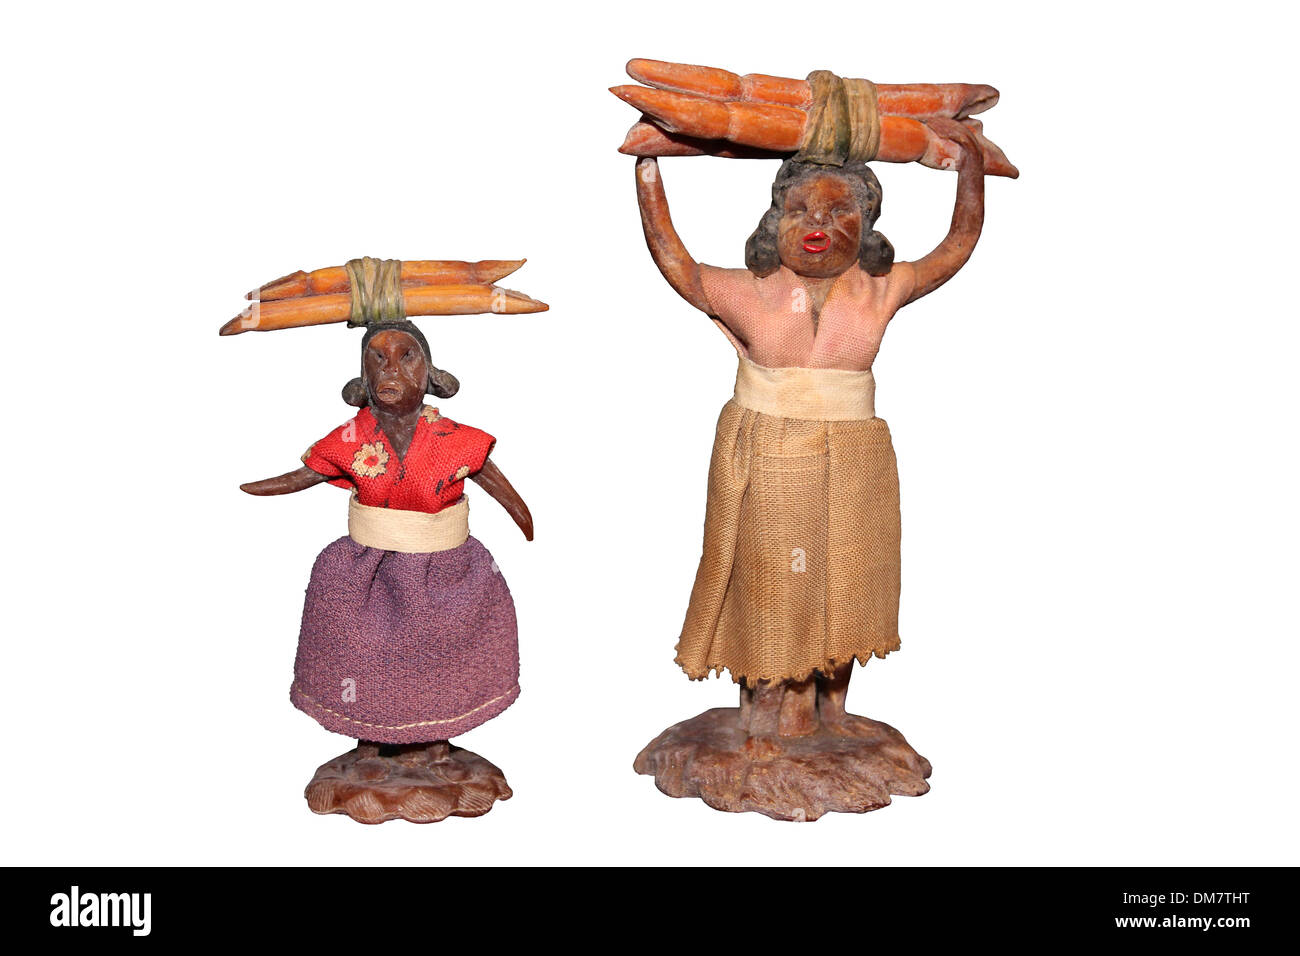 Molded Latex Figures Depicting Daily Life In Jamaica in the 1940's. Made For Tourists Stock Photo